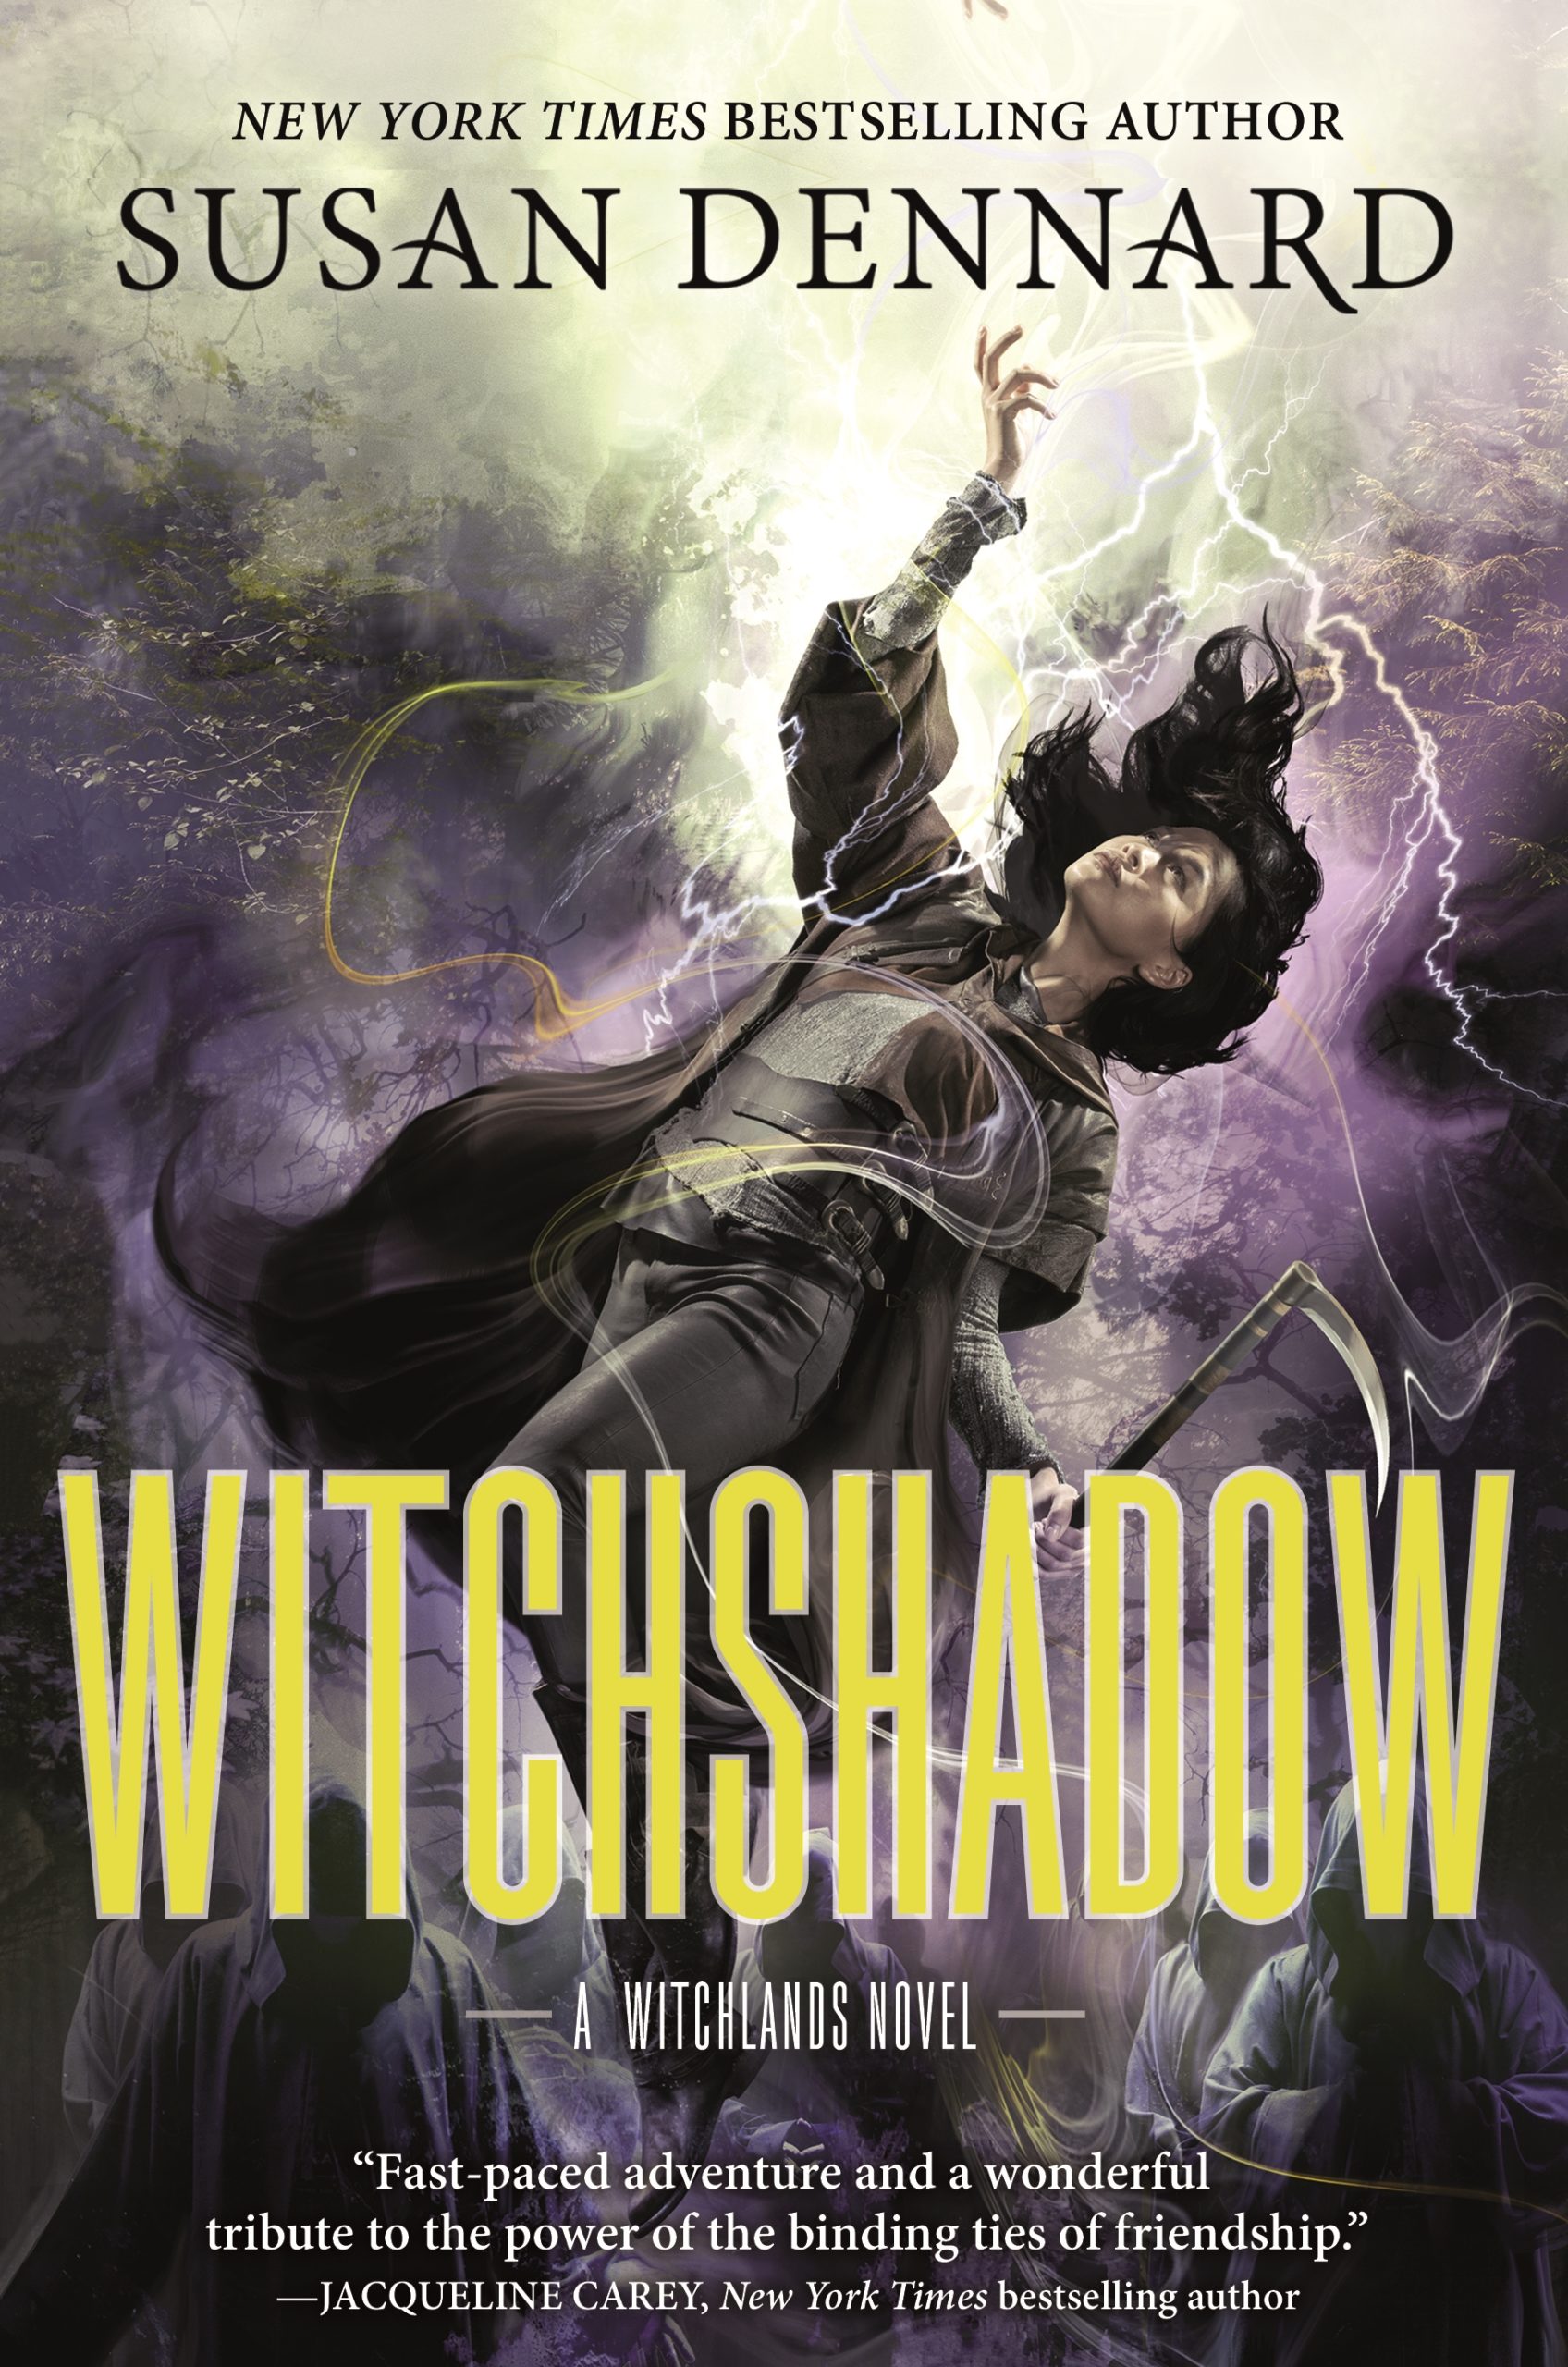 Witchshadows